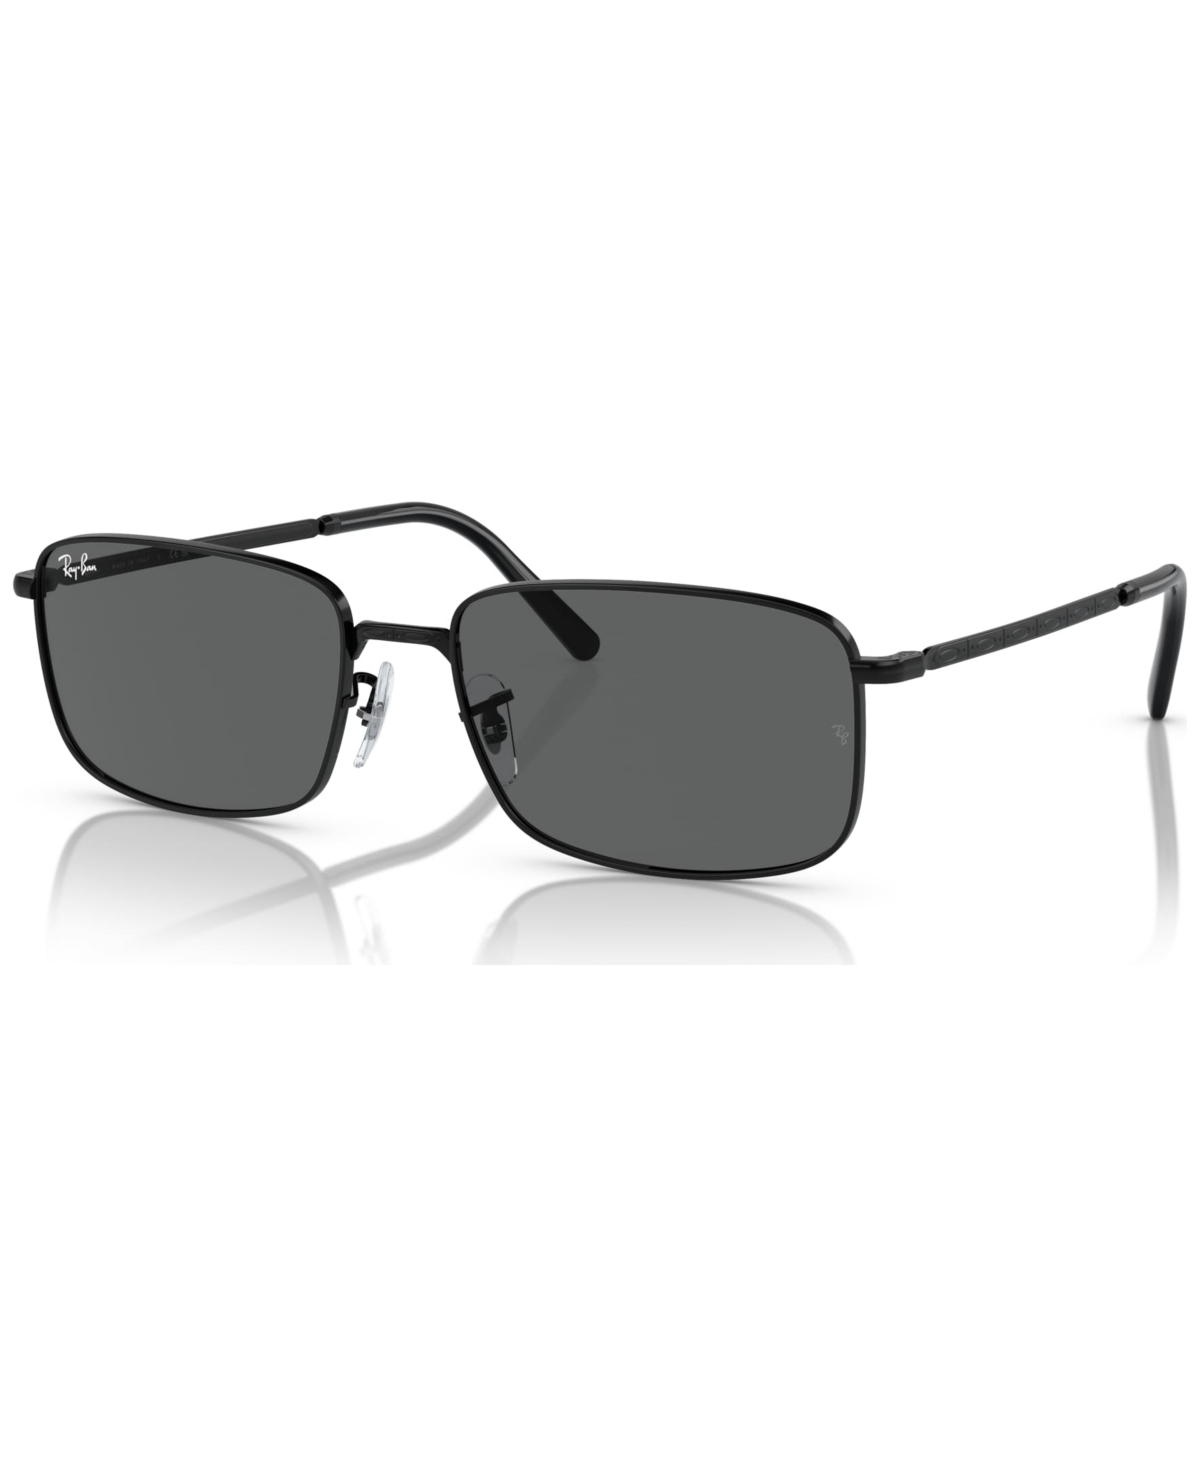 Ray Ban Unisex Sunglasses, Rb371760-x 60 In Black